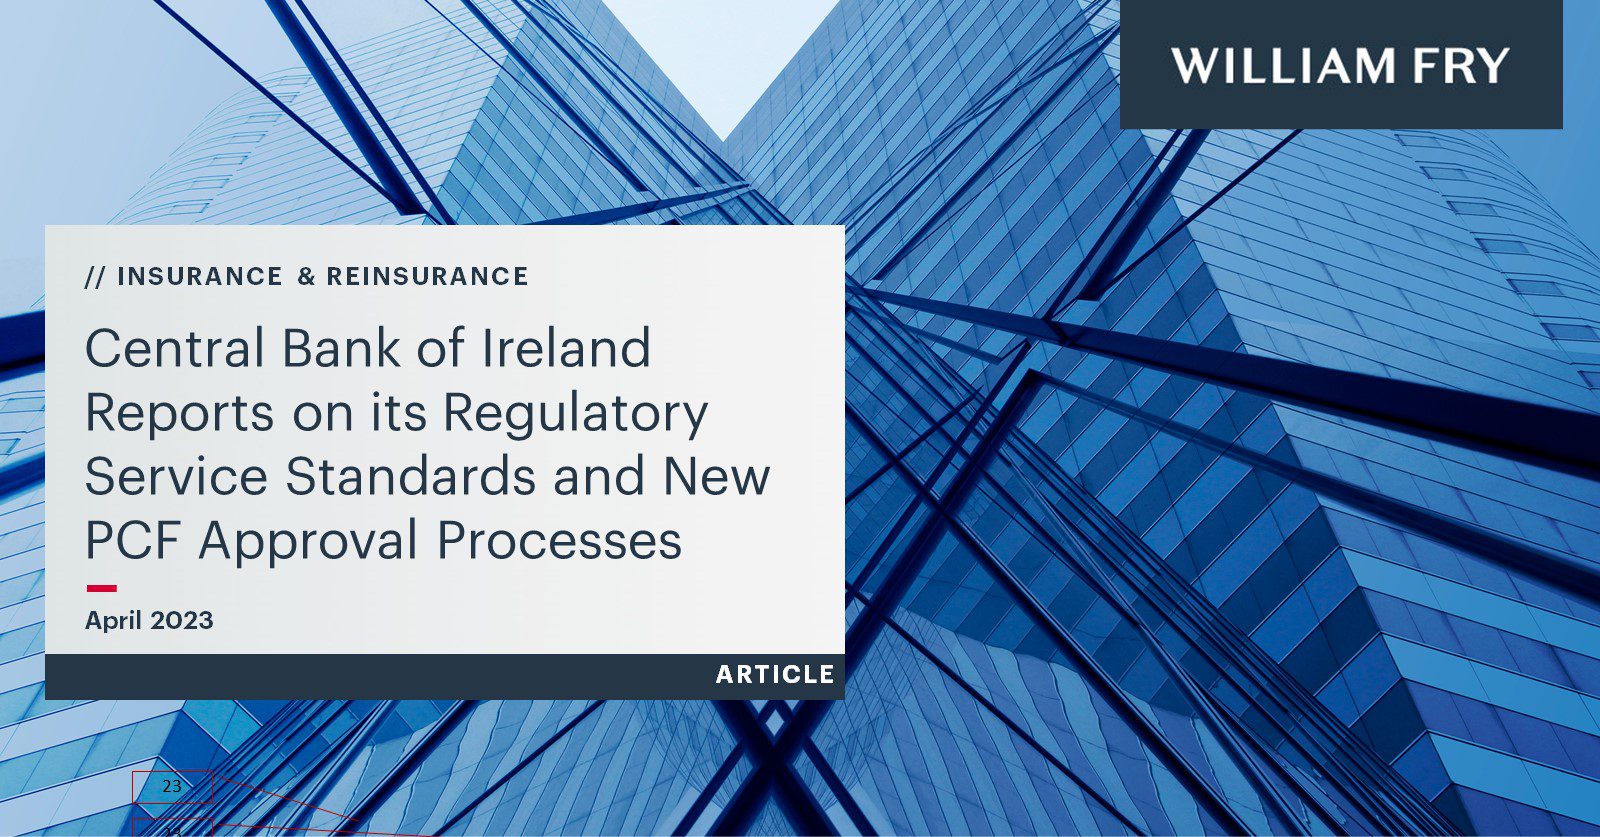 Central Bank of Ireland Reports on its Regulatory Service Standards and New PCF Approval Processes